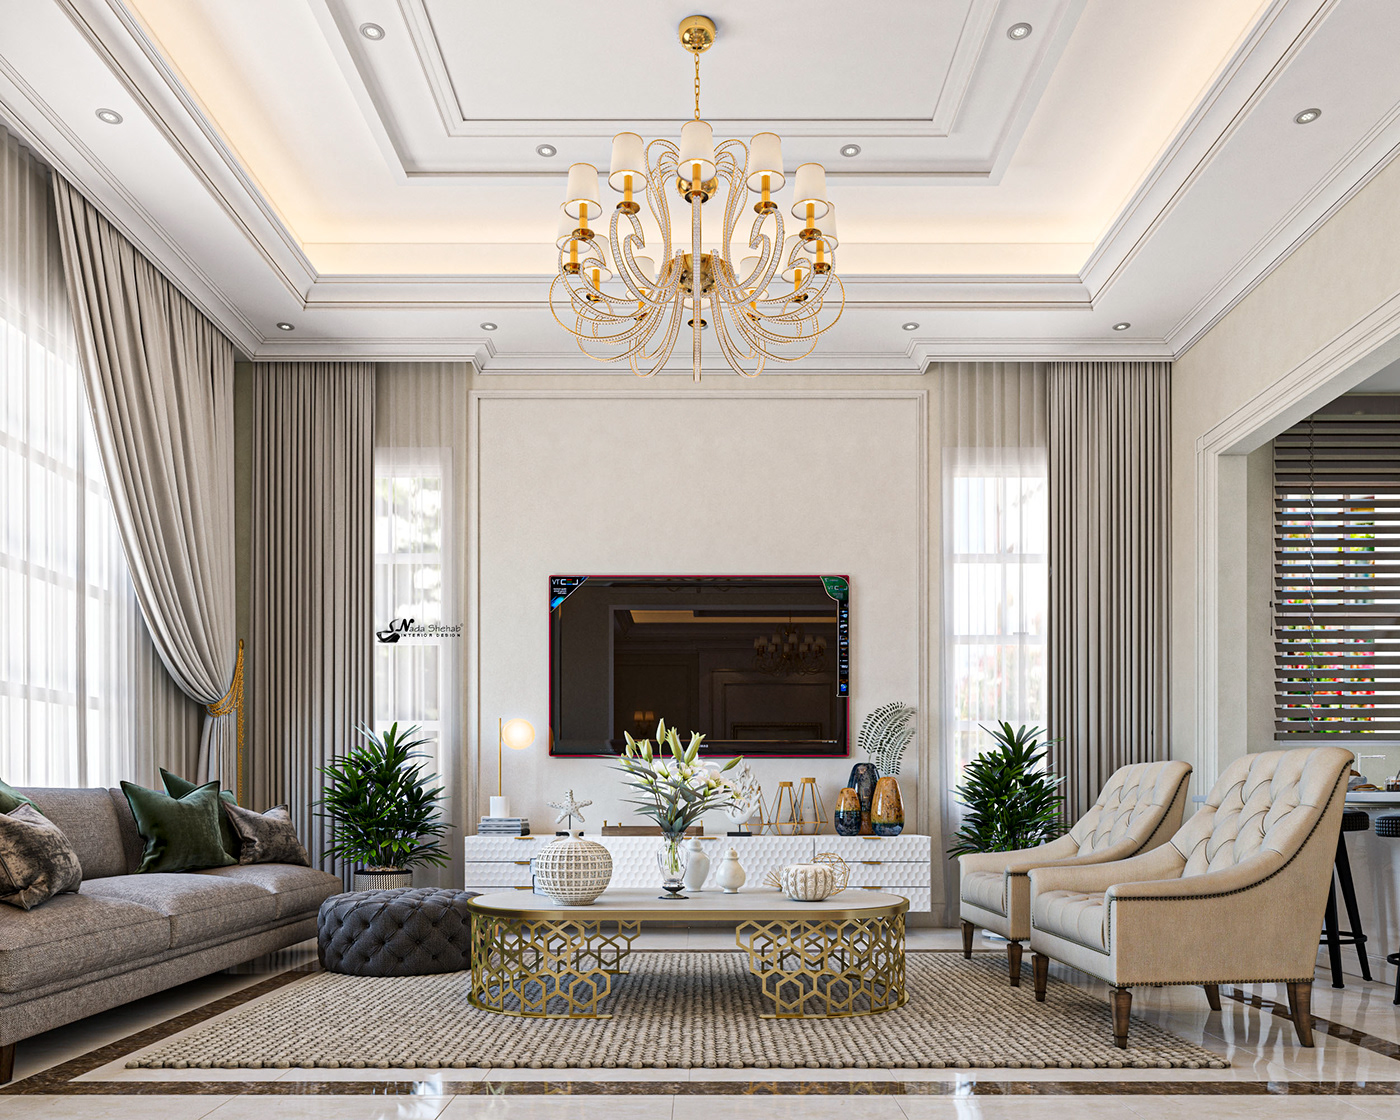 Nada Shehab: Sumptuous Designs With A Masterful Touch